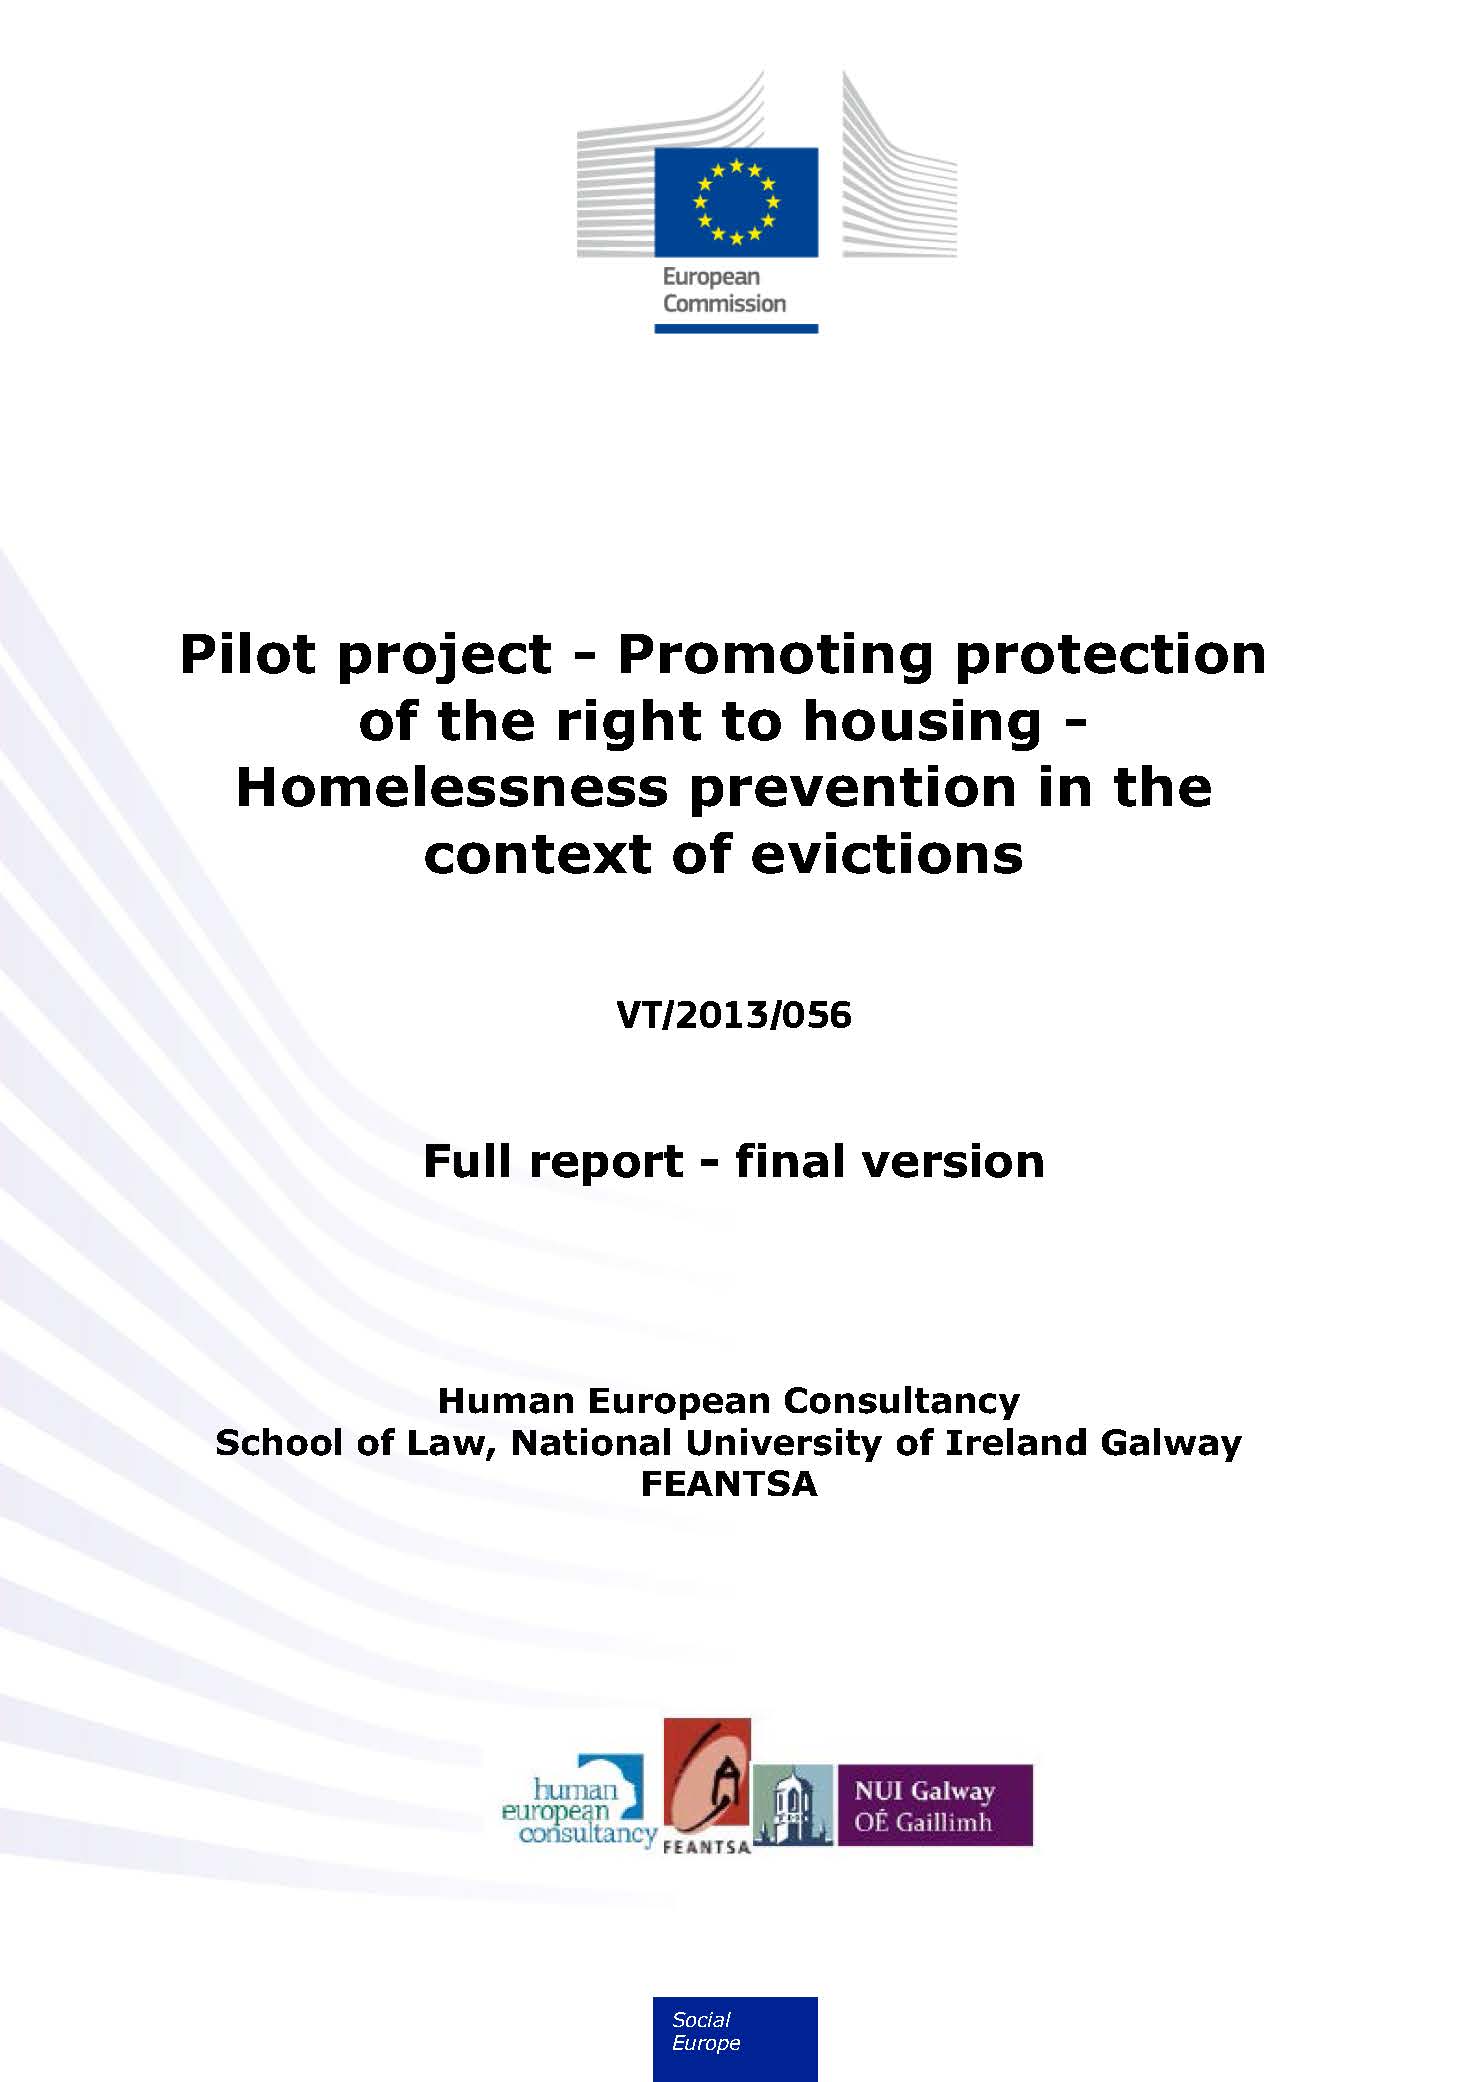 Pilot project - Promoting protection of the right to housing - Homelessness prevention in the context of evictions